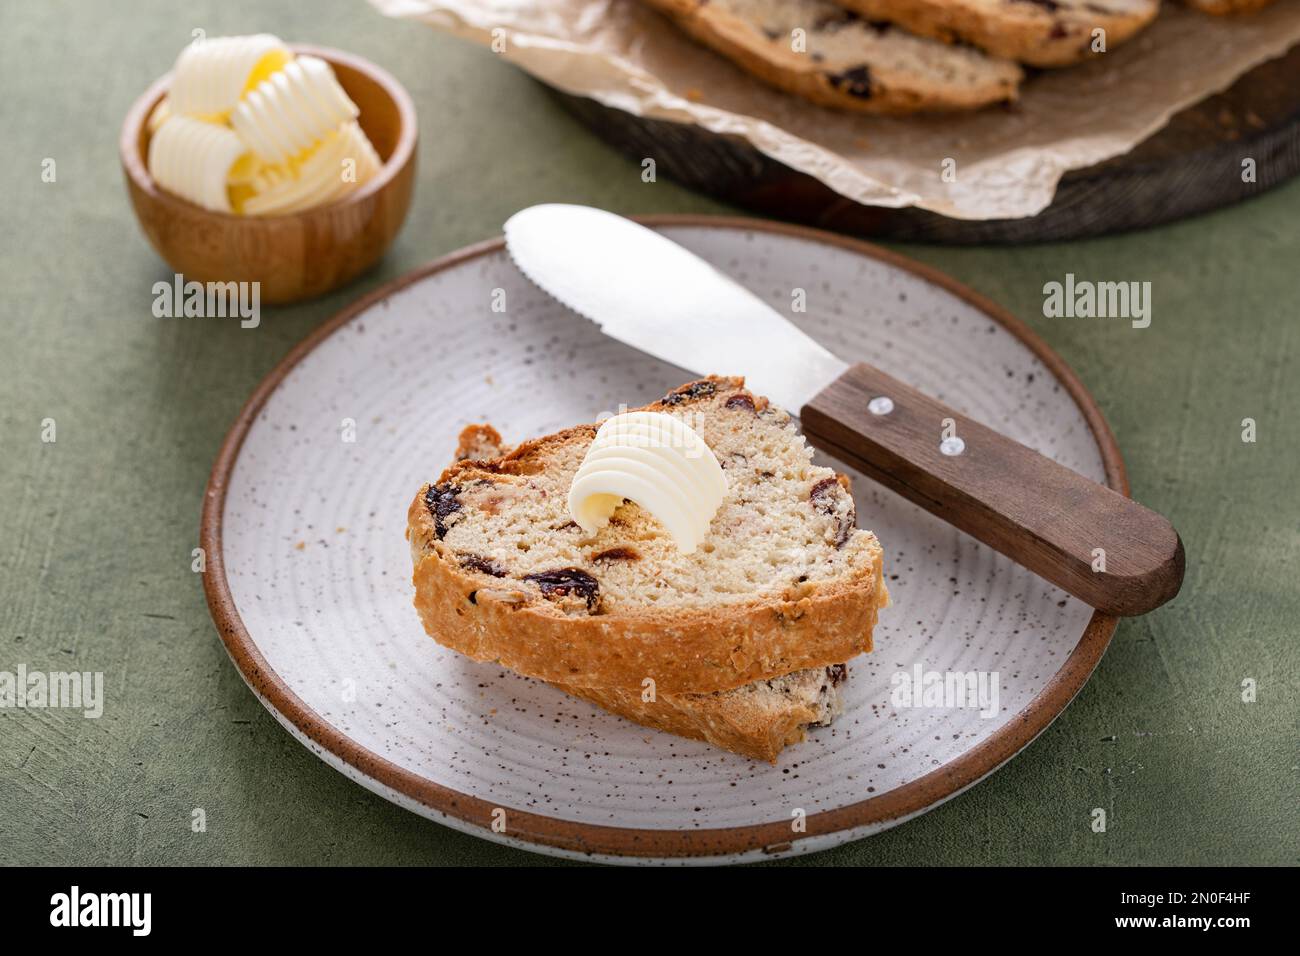 https://c8.alamy.com/comp/2N0F4HF/soda-bread-in-a-cast-iron-pan-with-cranberries-and-pecans-sliced-and-served-with-irish-butter-irish-recipe-idea-with-st-patricks-day-2N0F4HF.jpg